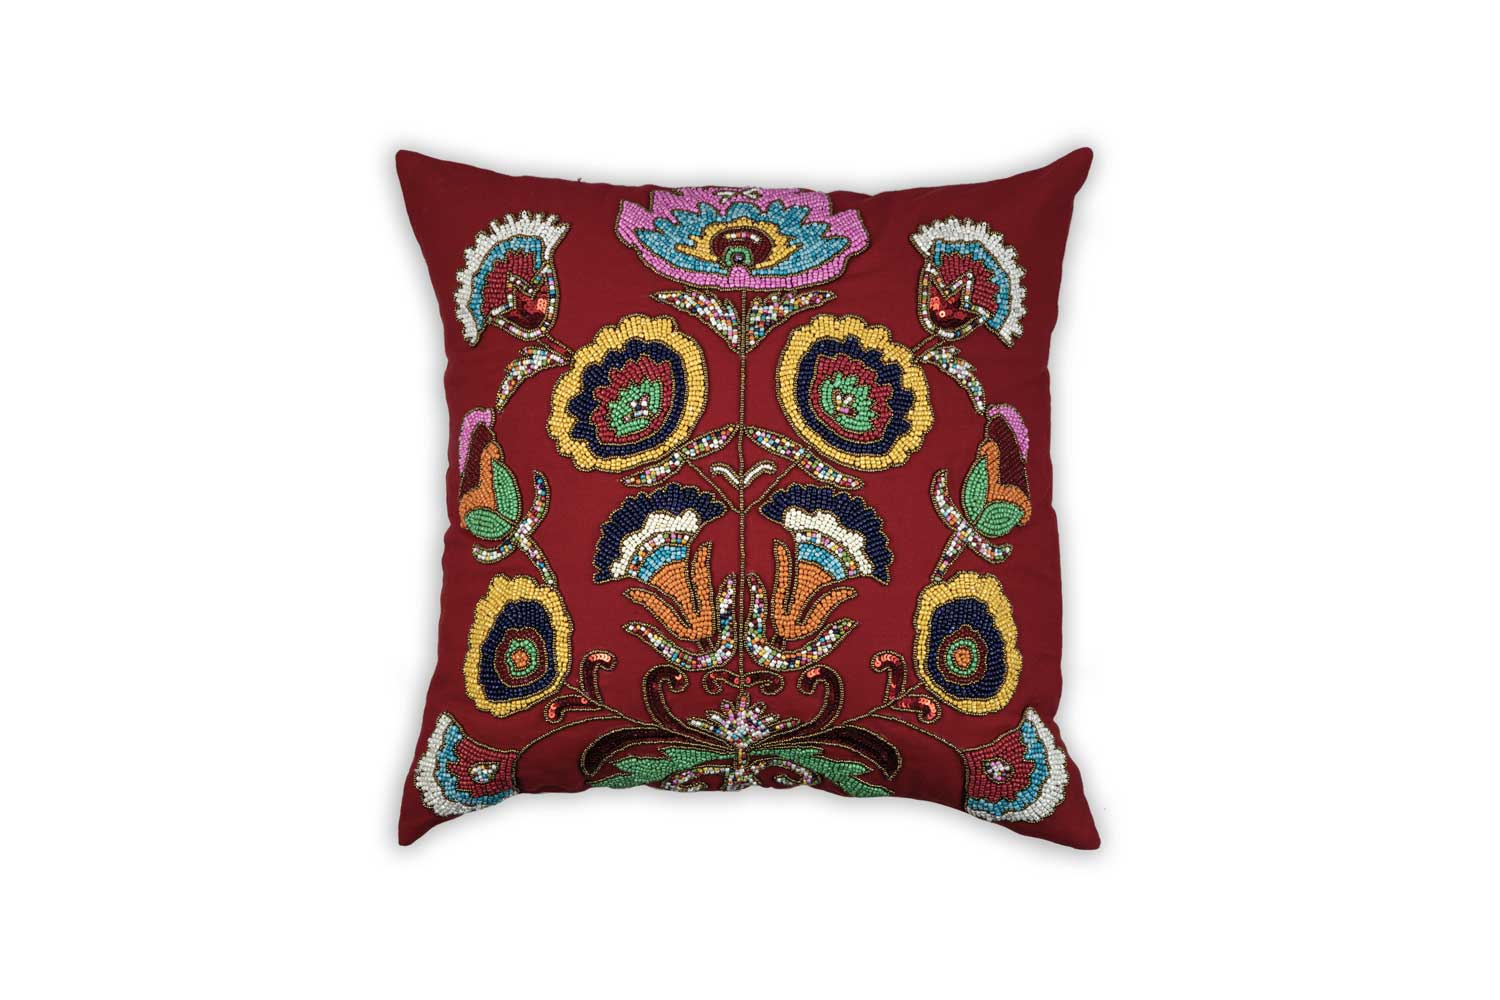 Garden in Paradise I Hand Beaded Floral Pillow